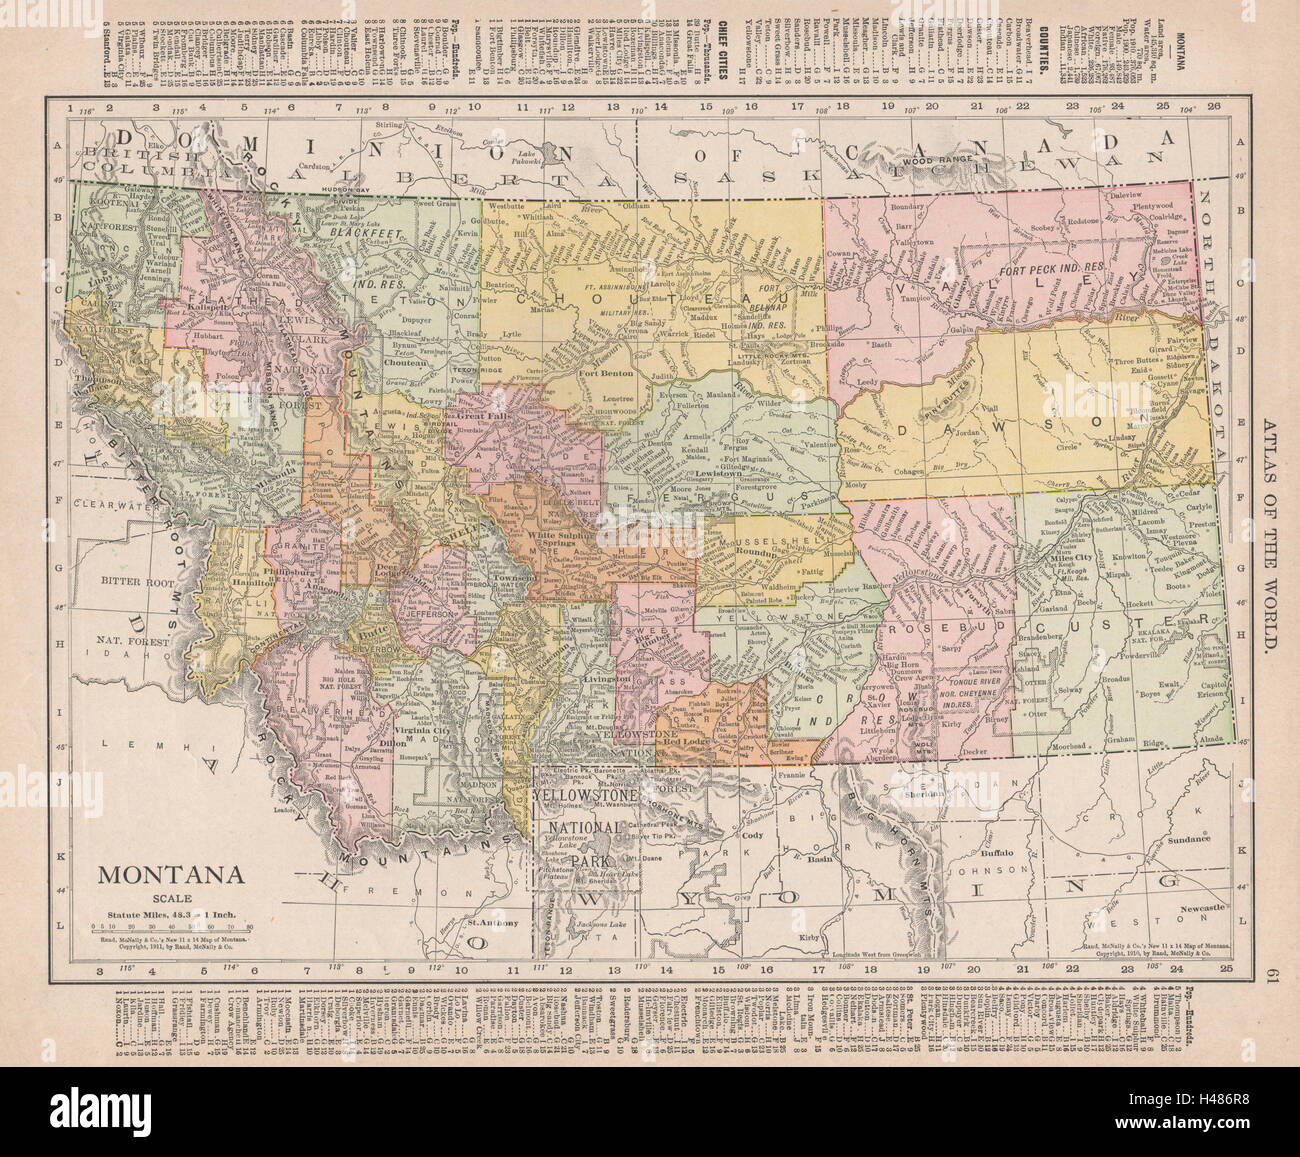 Montana state map showing counties. Yellowstone. RAND MCNALLY 1912 old Stock Photo